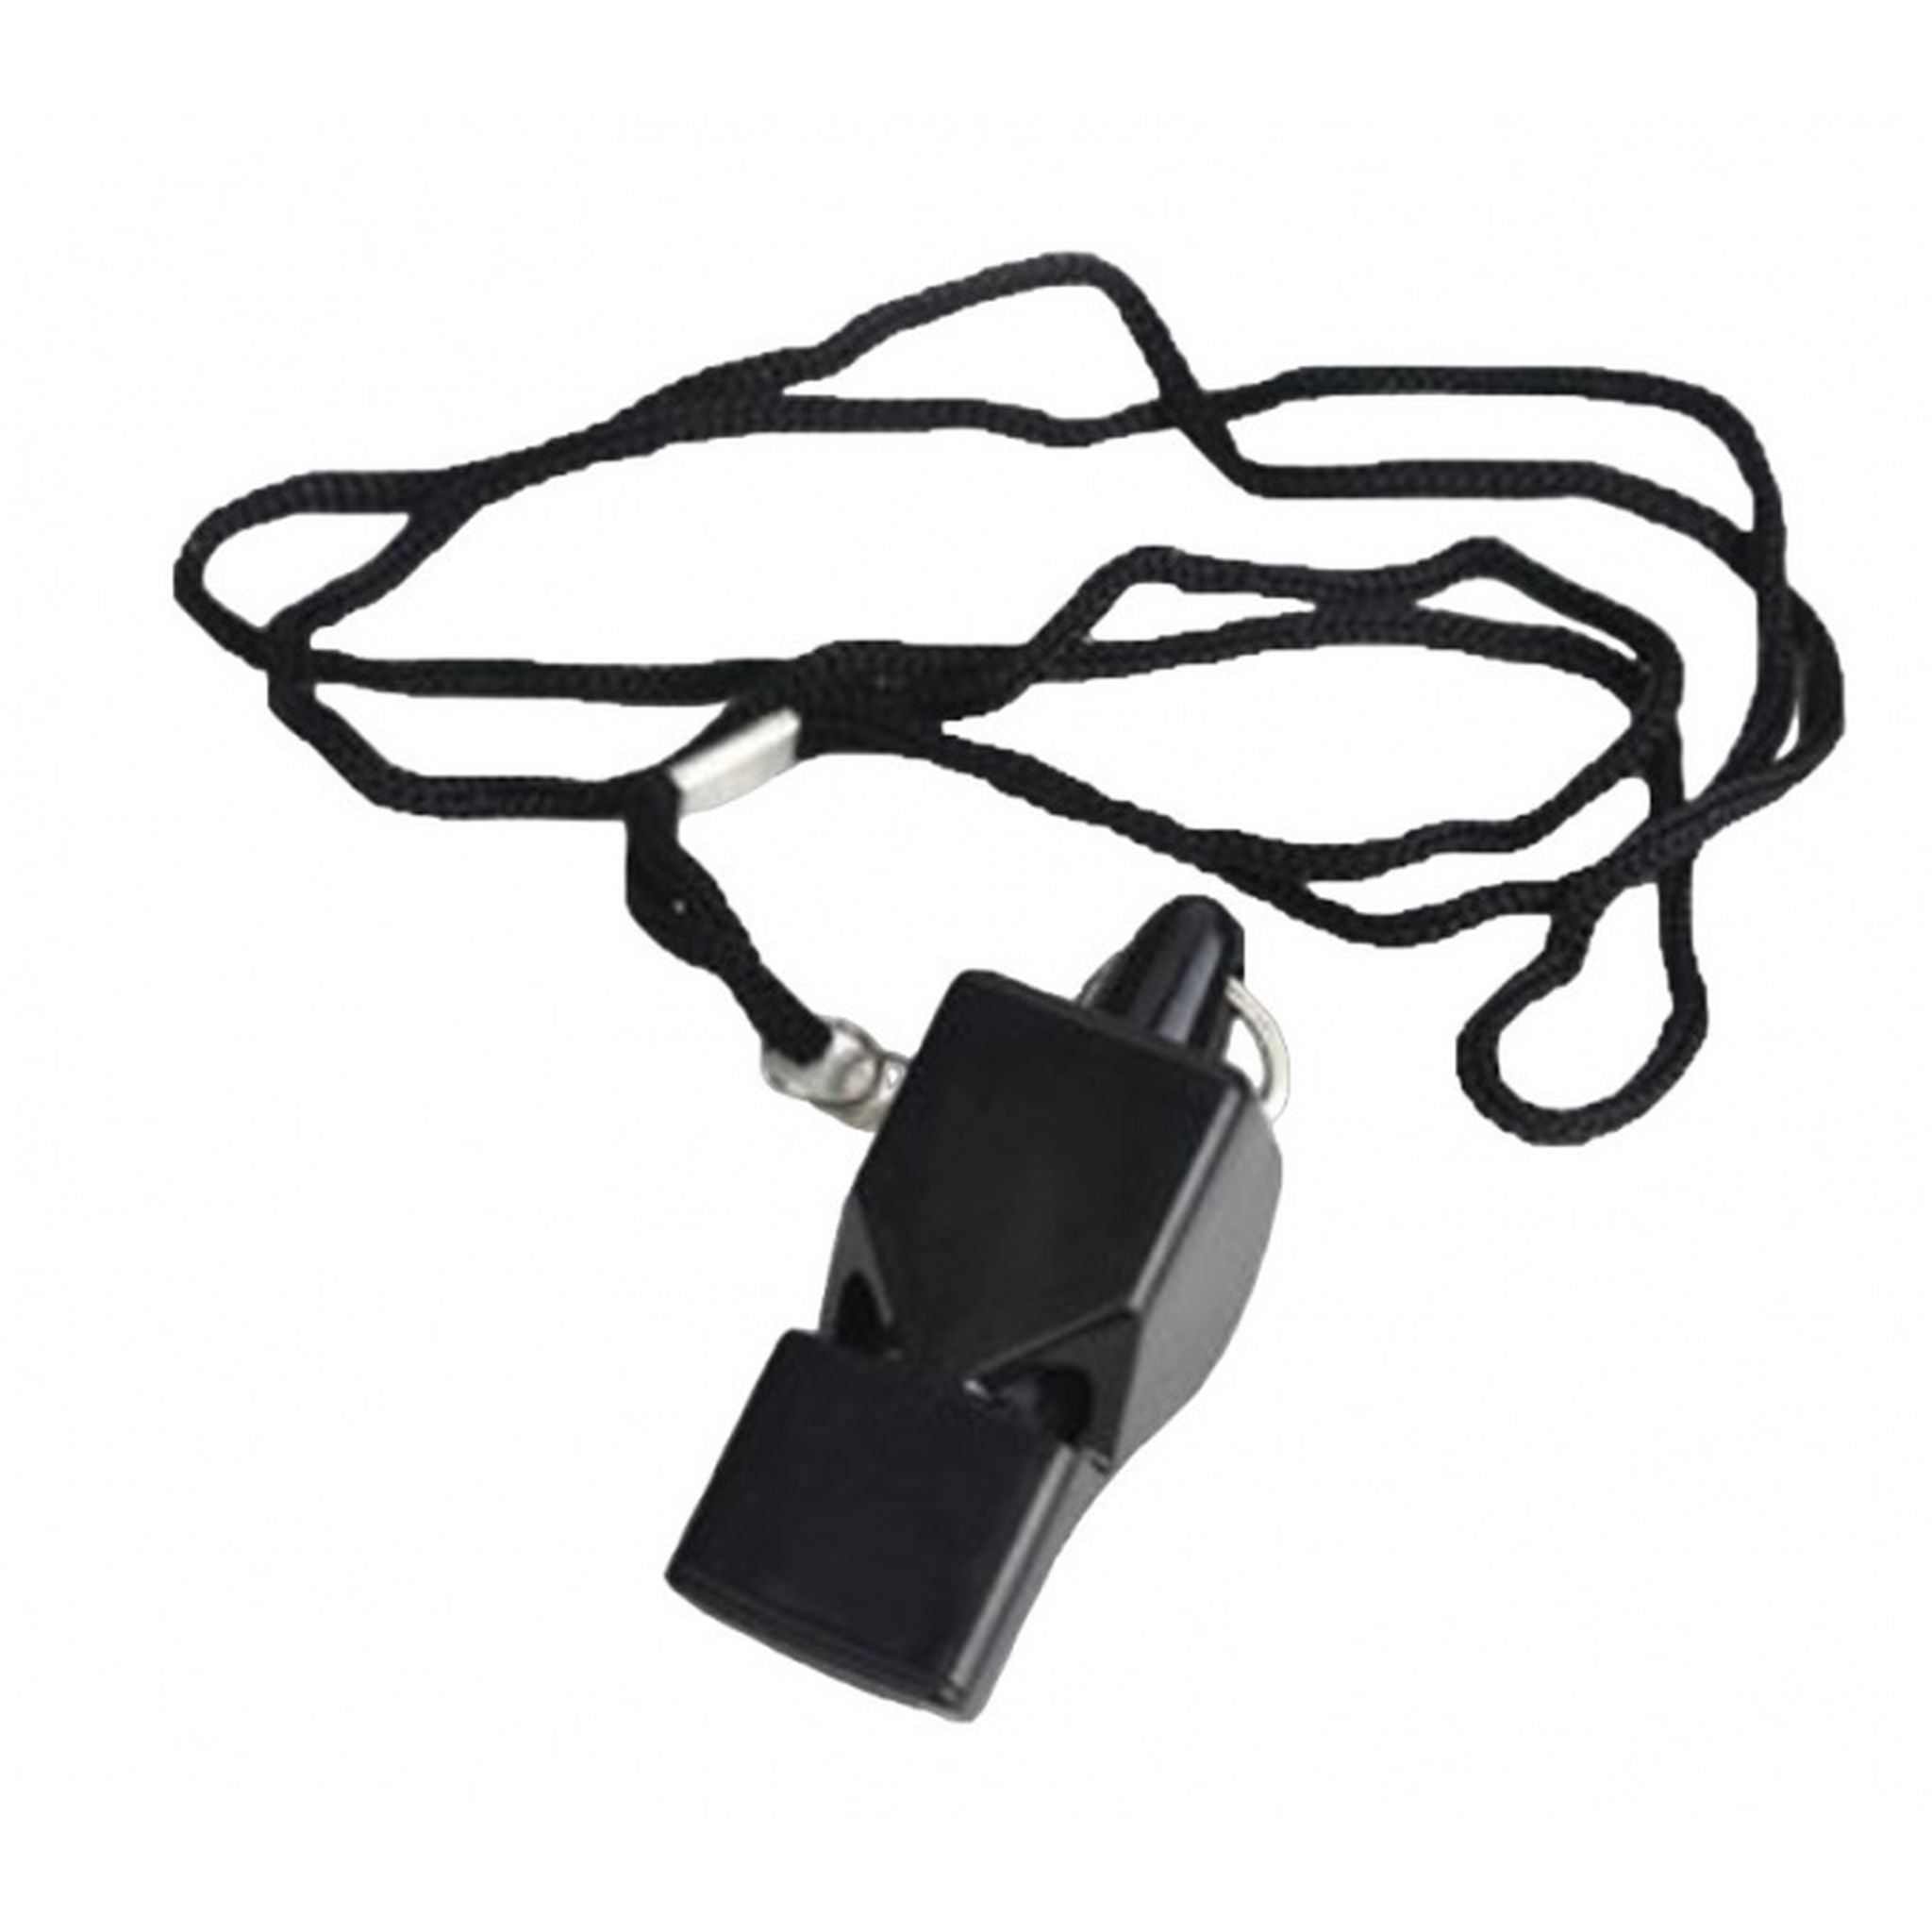 Nomis Plastic Whistle with Lanyard - Classic